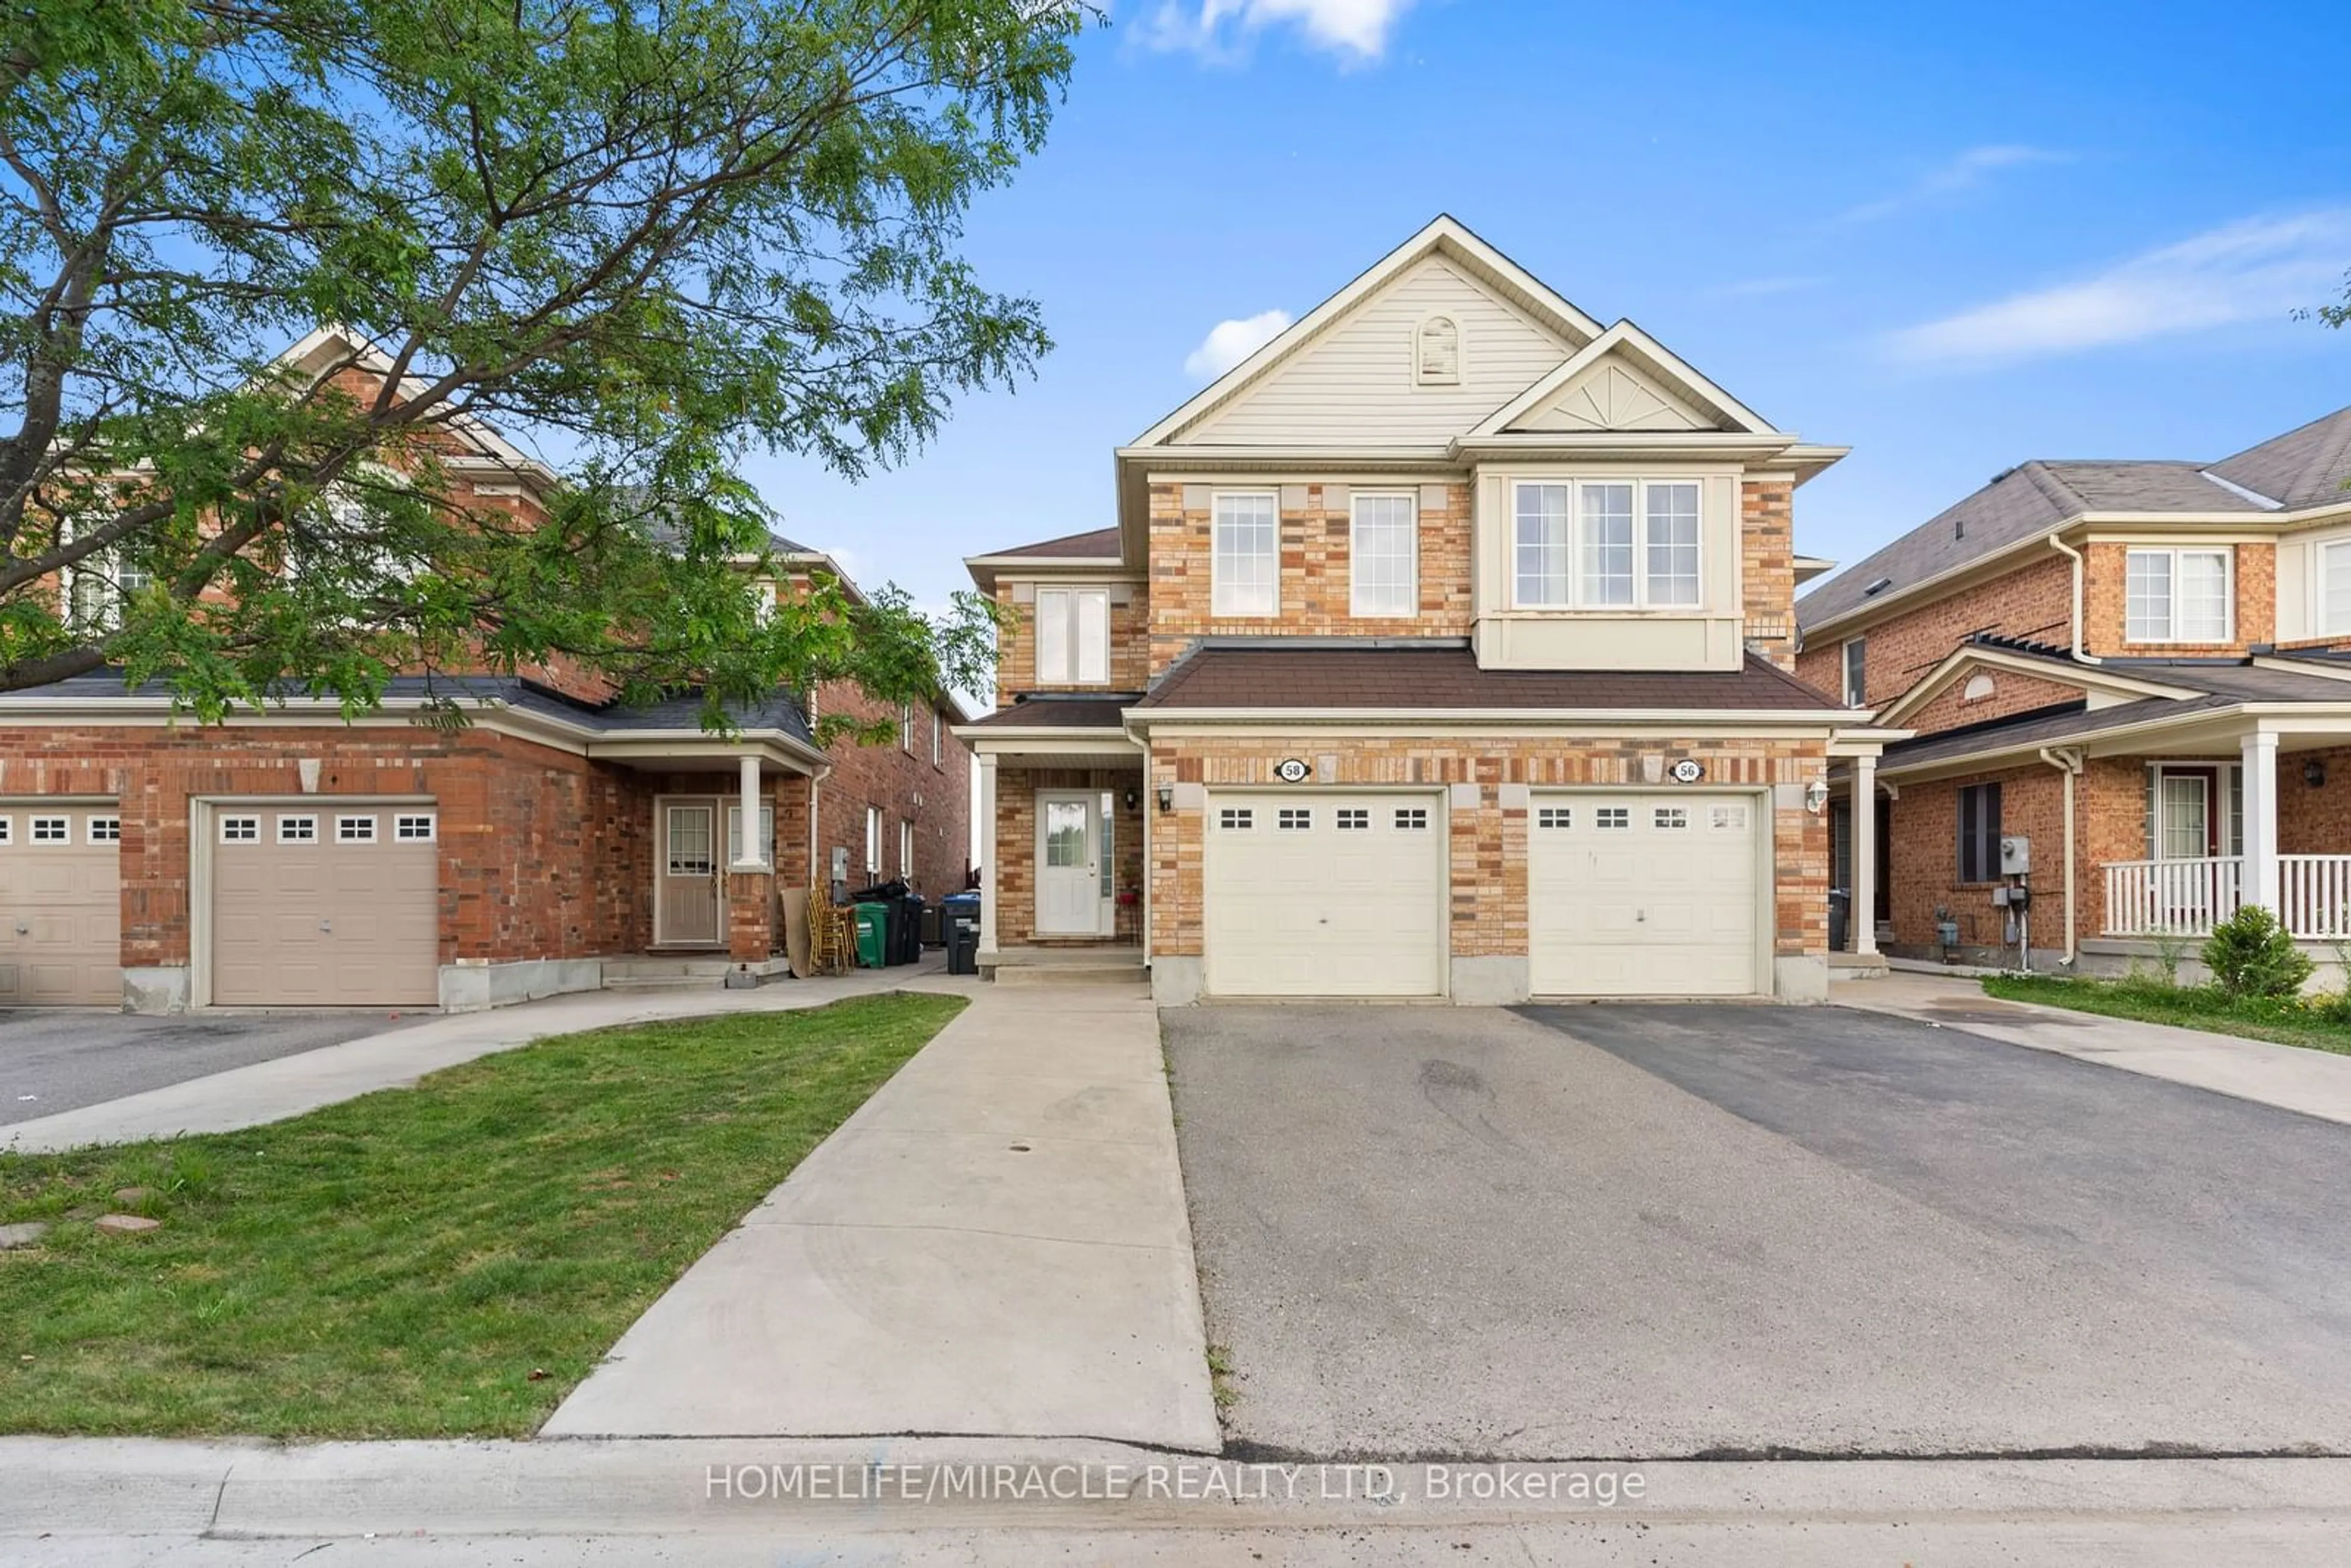 Frontside or backside of a home for 58 Coachlight Cres, Brampton Ontario L6P 2Y7